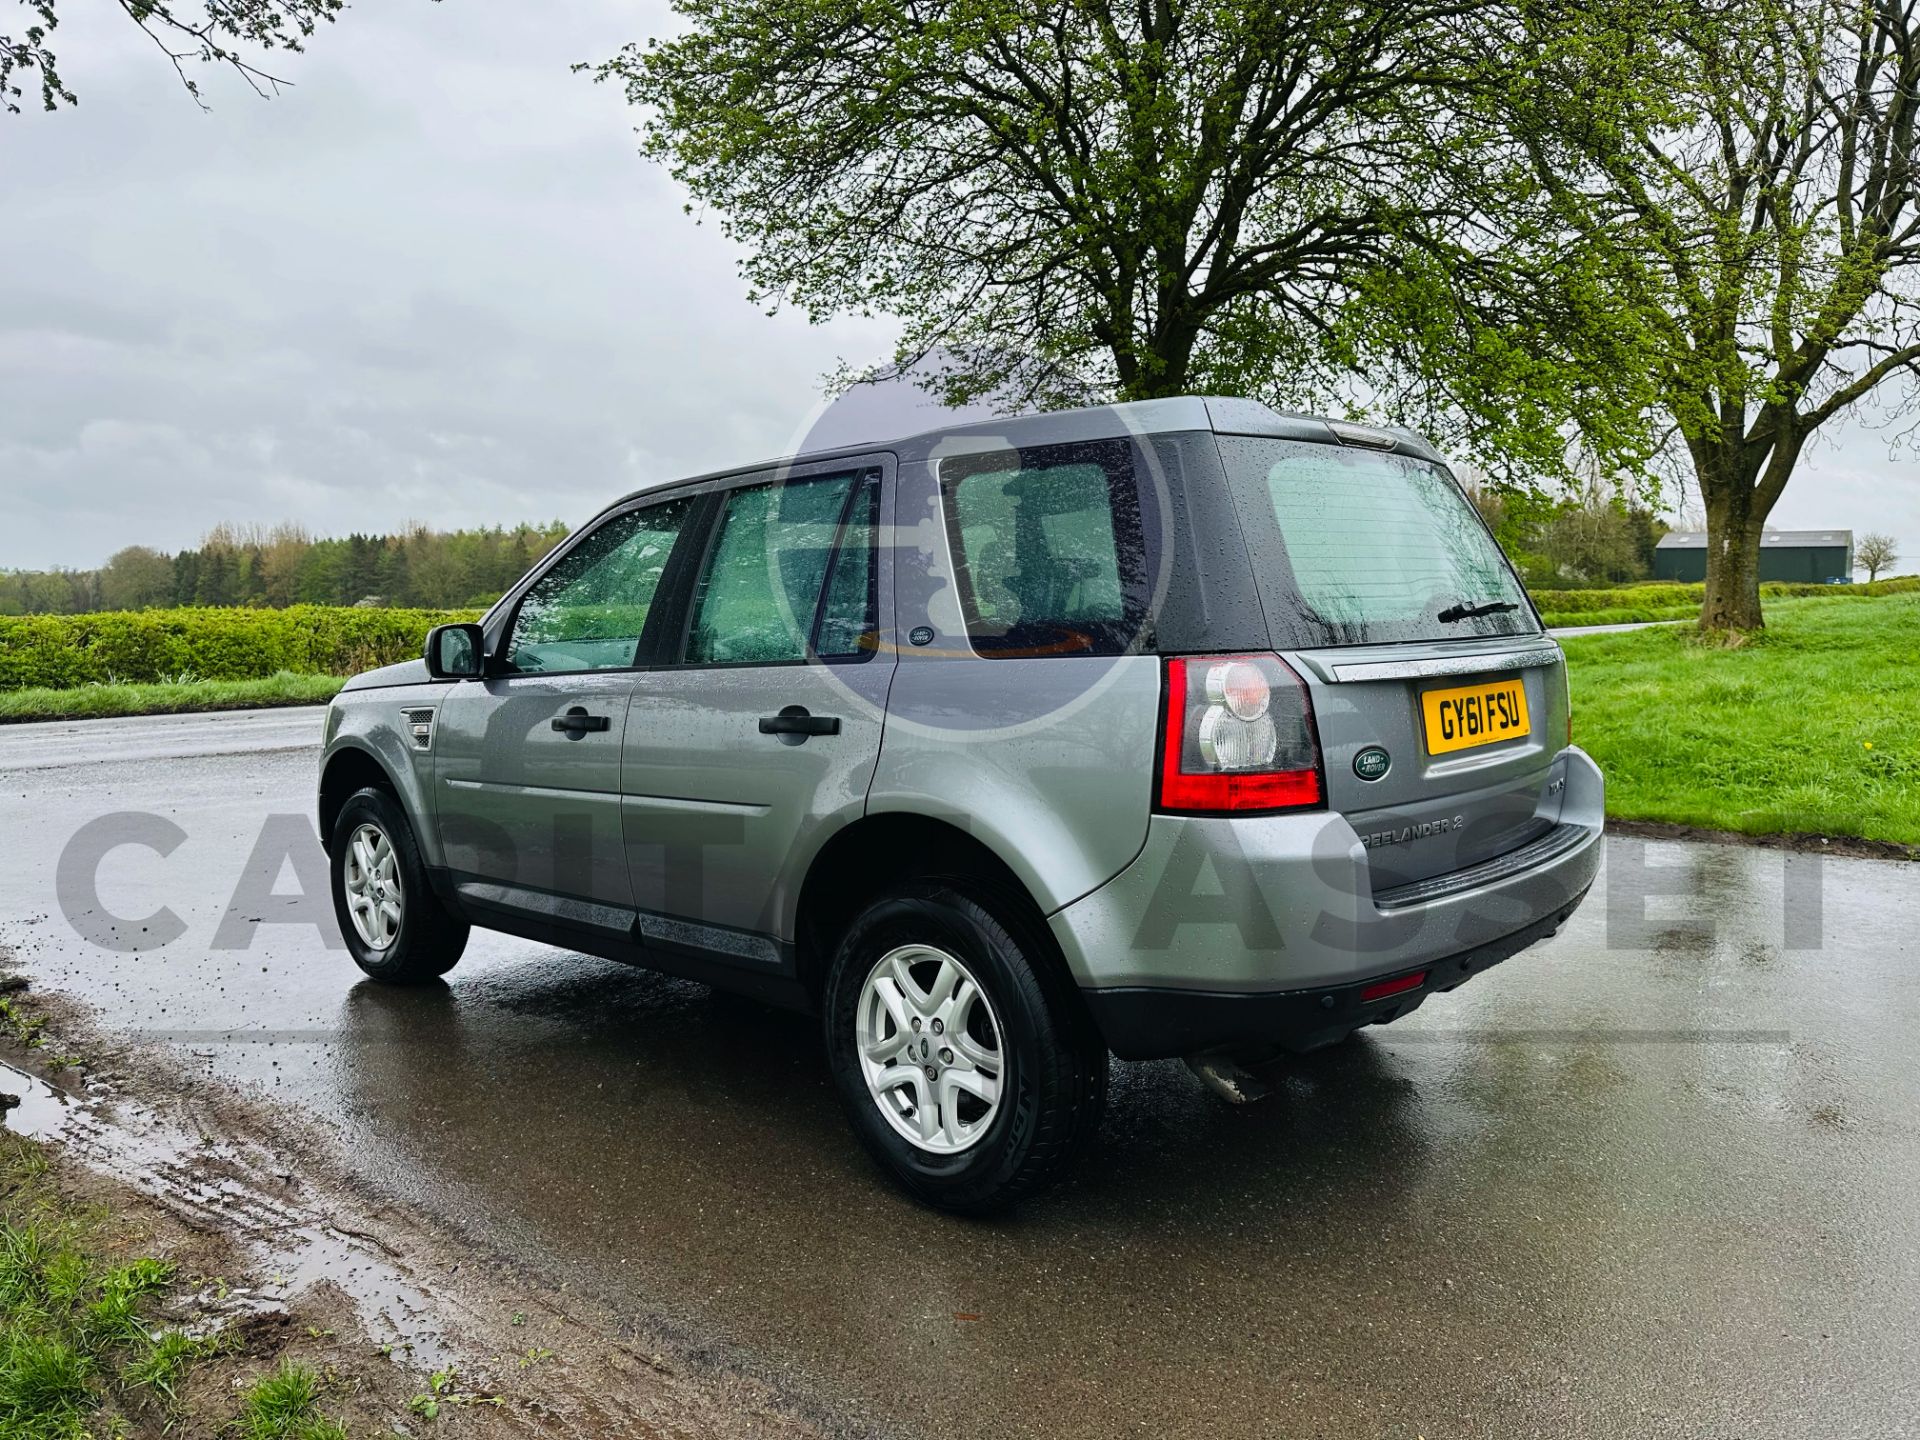 (ON SALE) LANDROVER FREELANDER 2.2TD4 S EDITION "AUTO - 2012 MODEL - AIR CON - FSH - Image 7 of 33